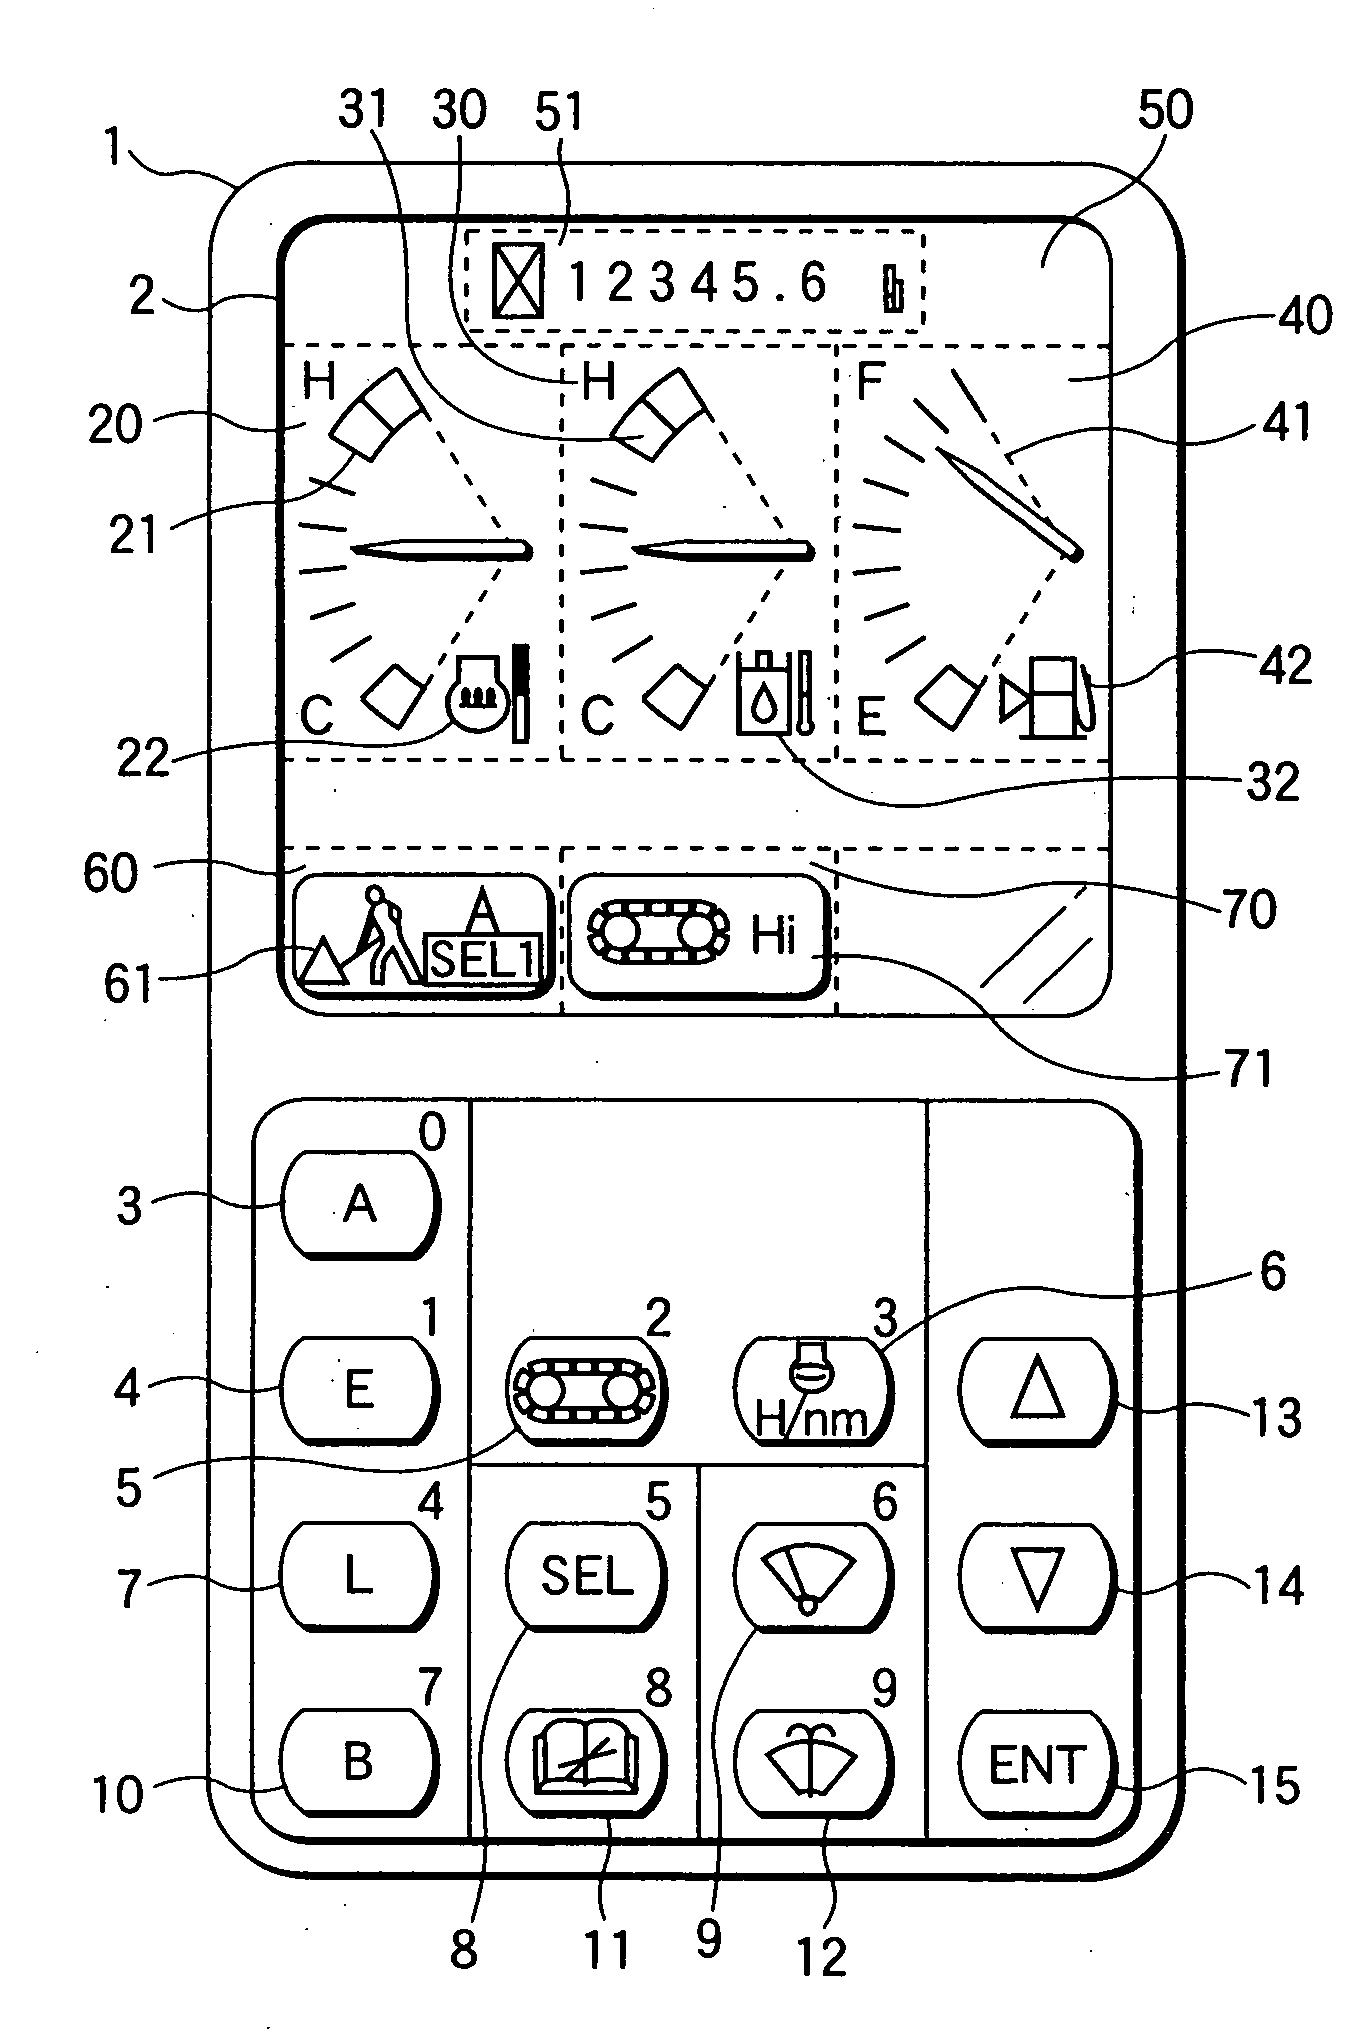 Display device for working machine